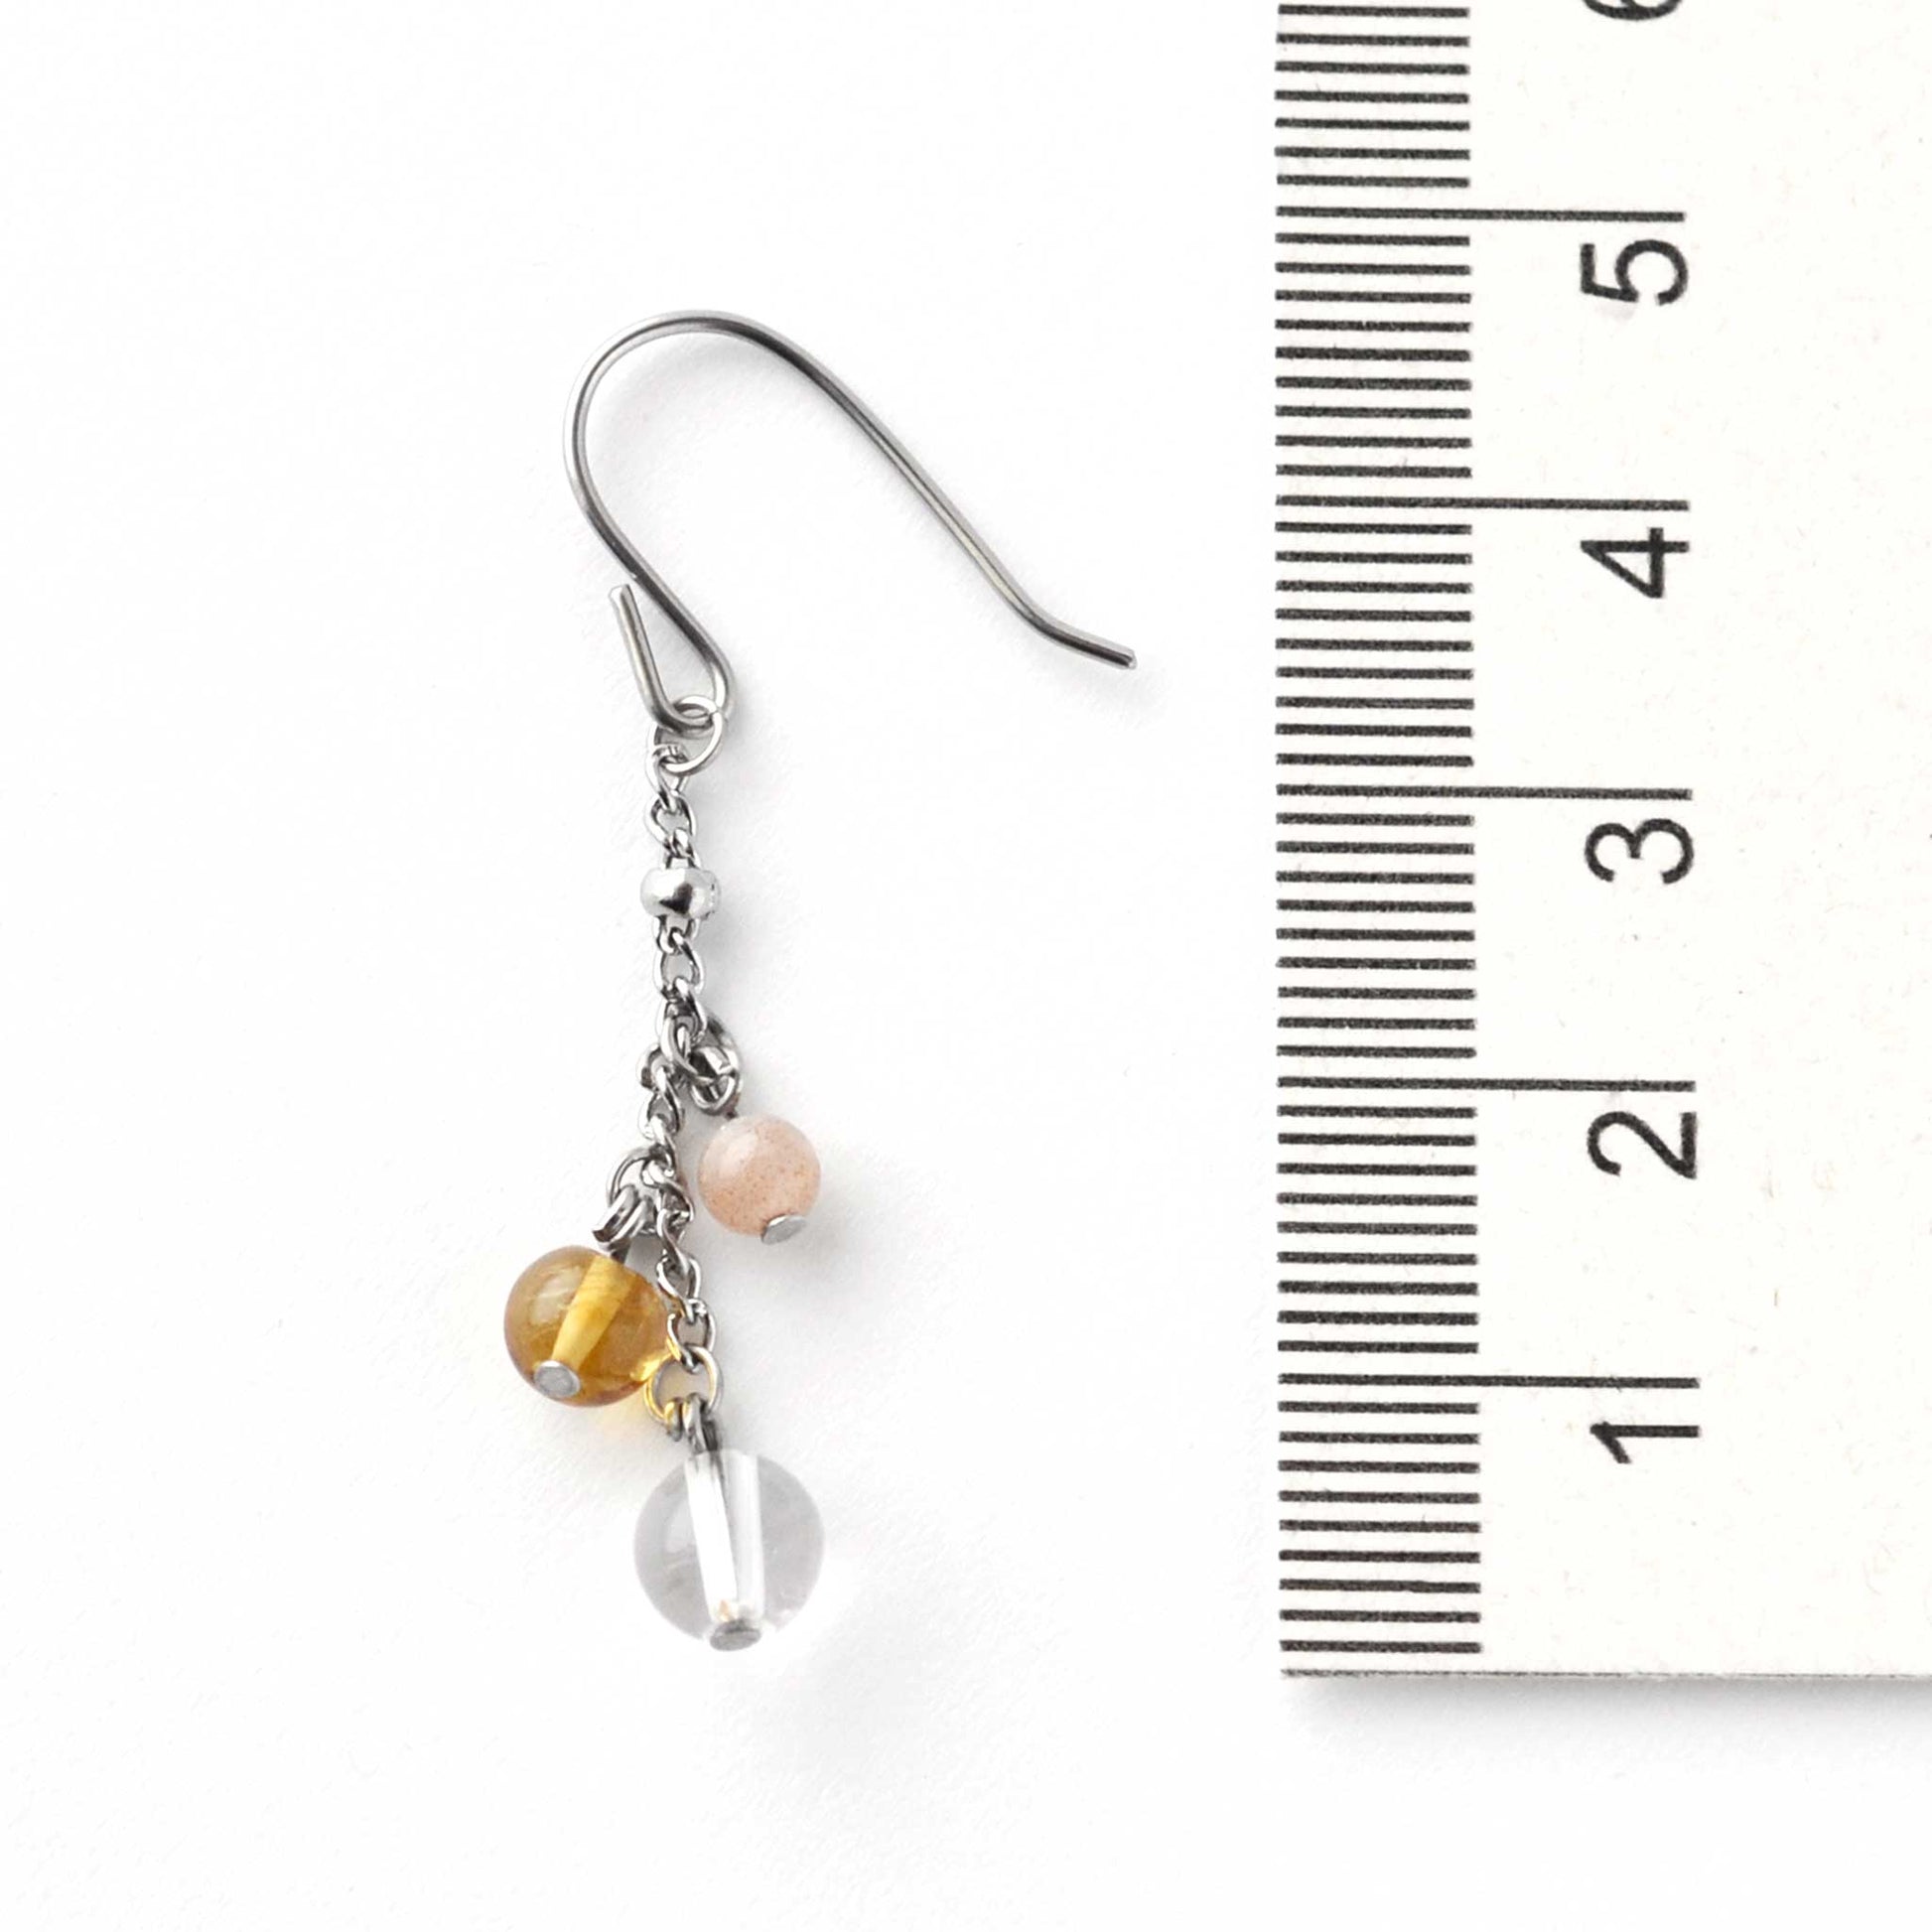 Yellow gemstone drop earring next to ruler showing drop length at 4.5cm